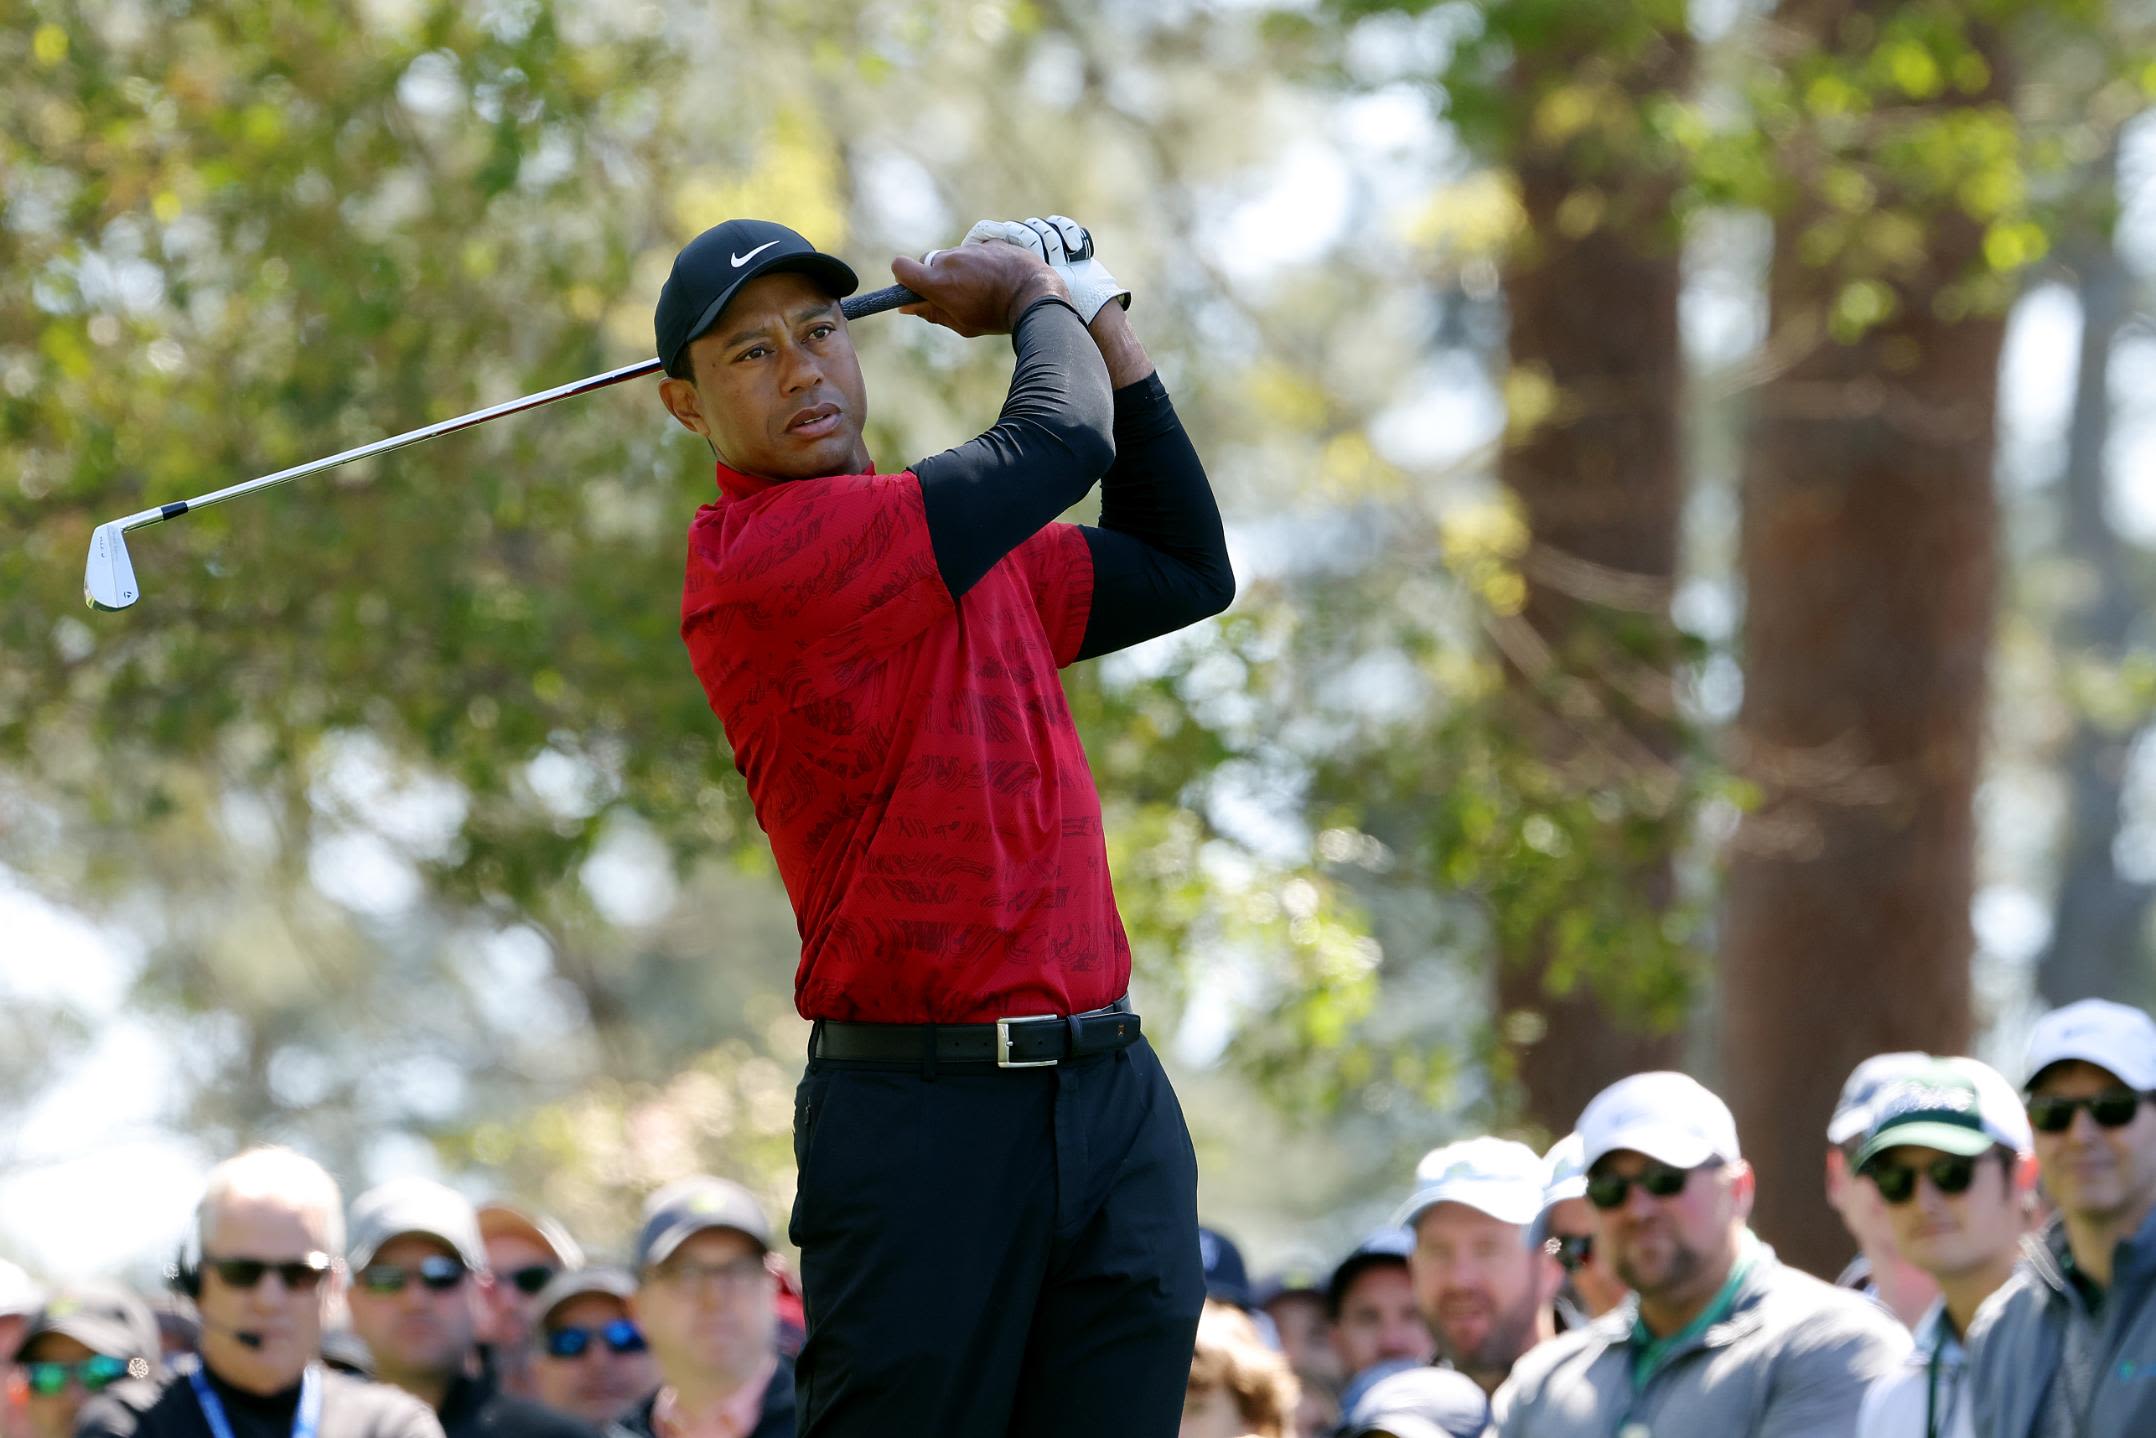 Vegas severely downgrades Tiger Woods' Masters odds after ugly